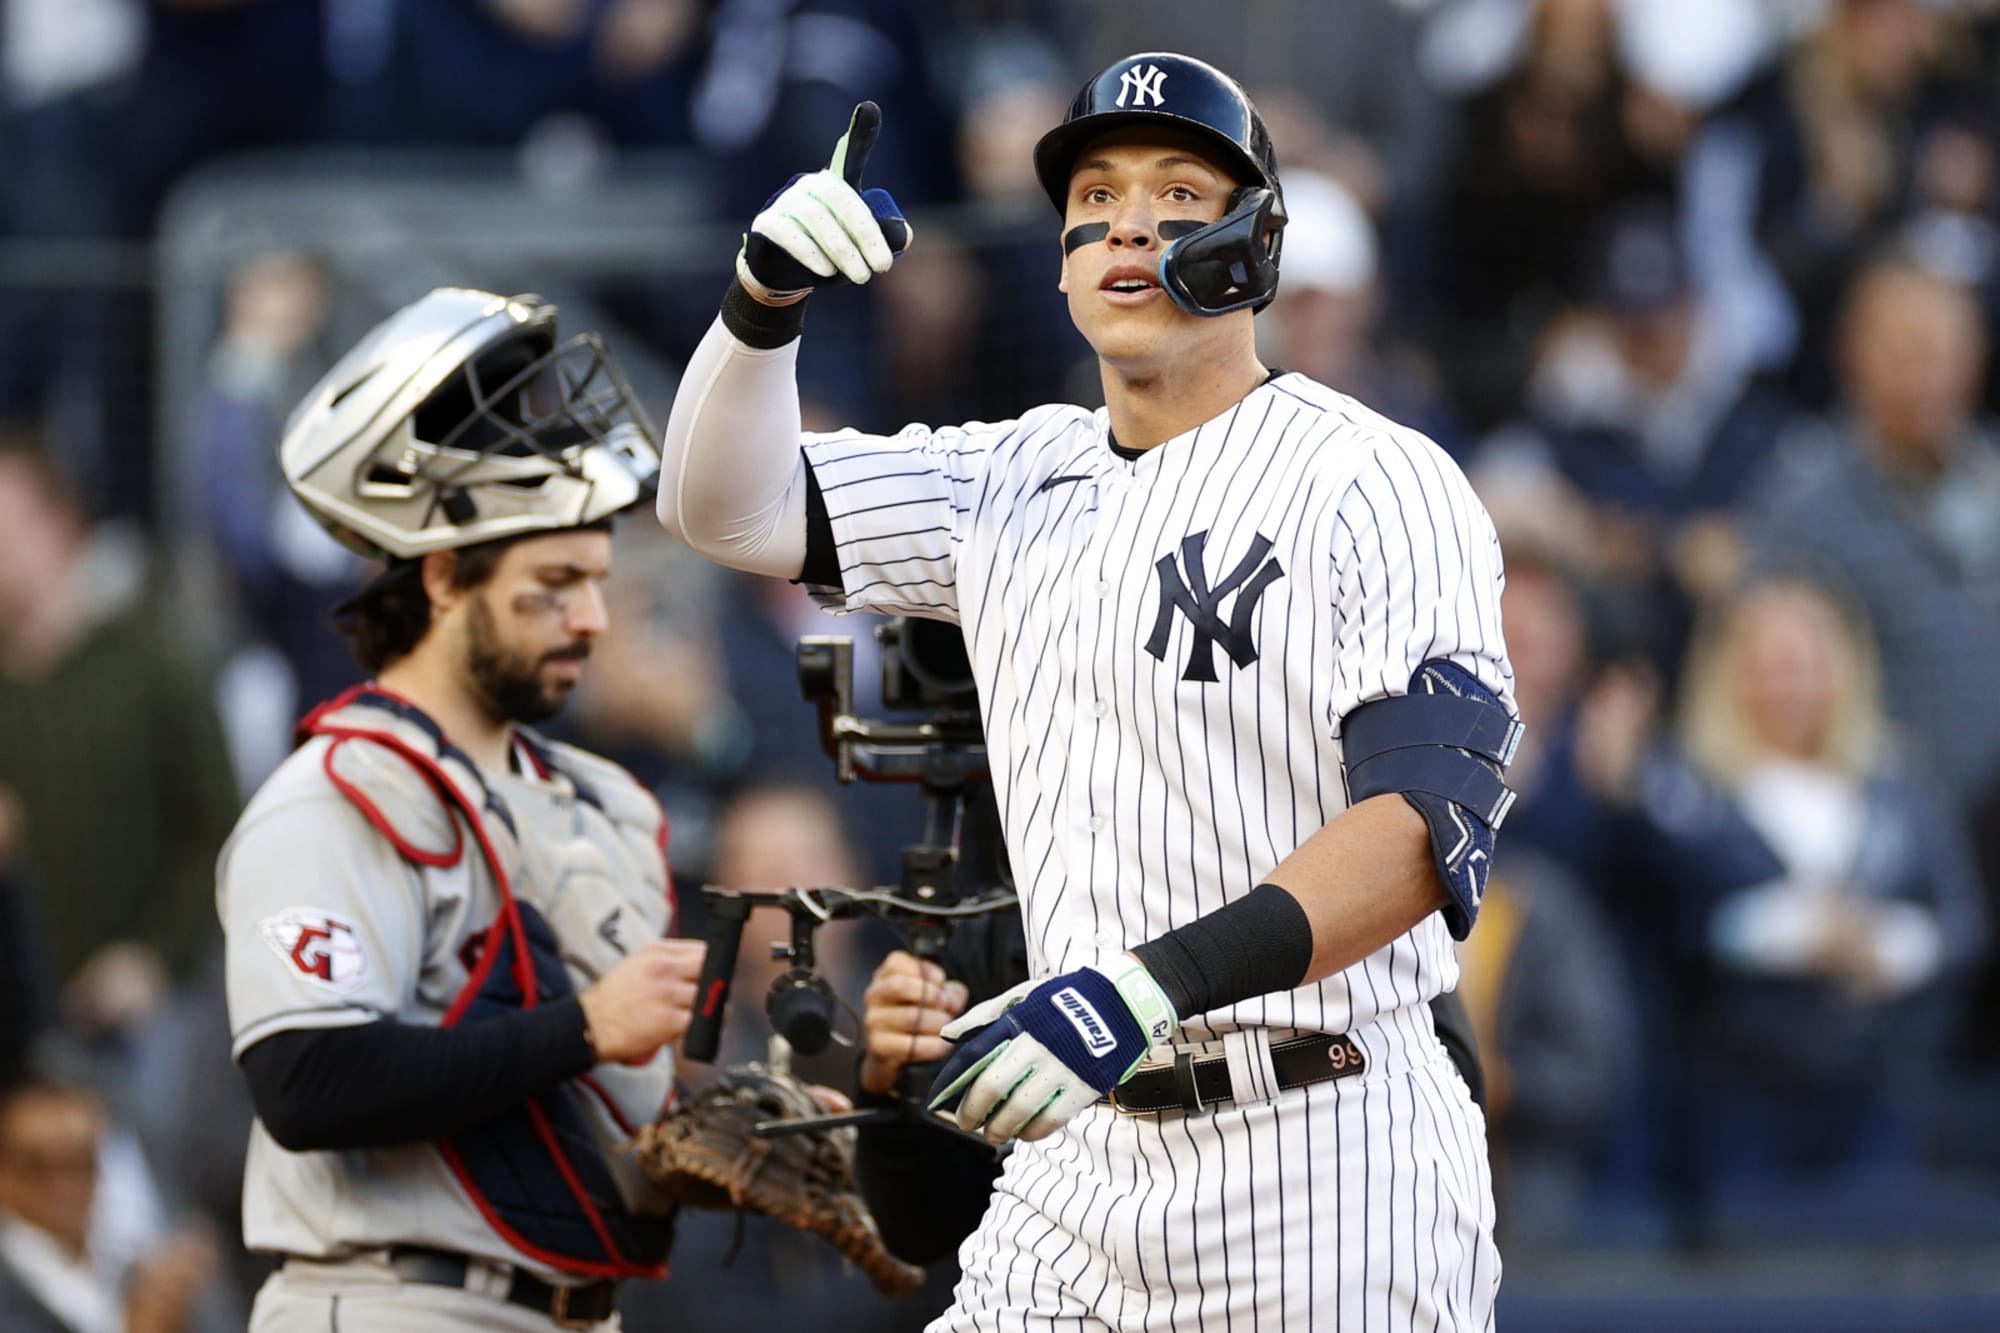 Photo of Aaron Judge instagram post and reported offer sends Yankees fans into a frenzy